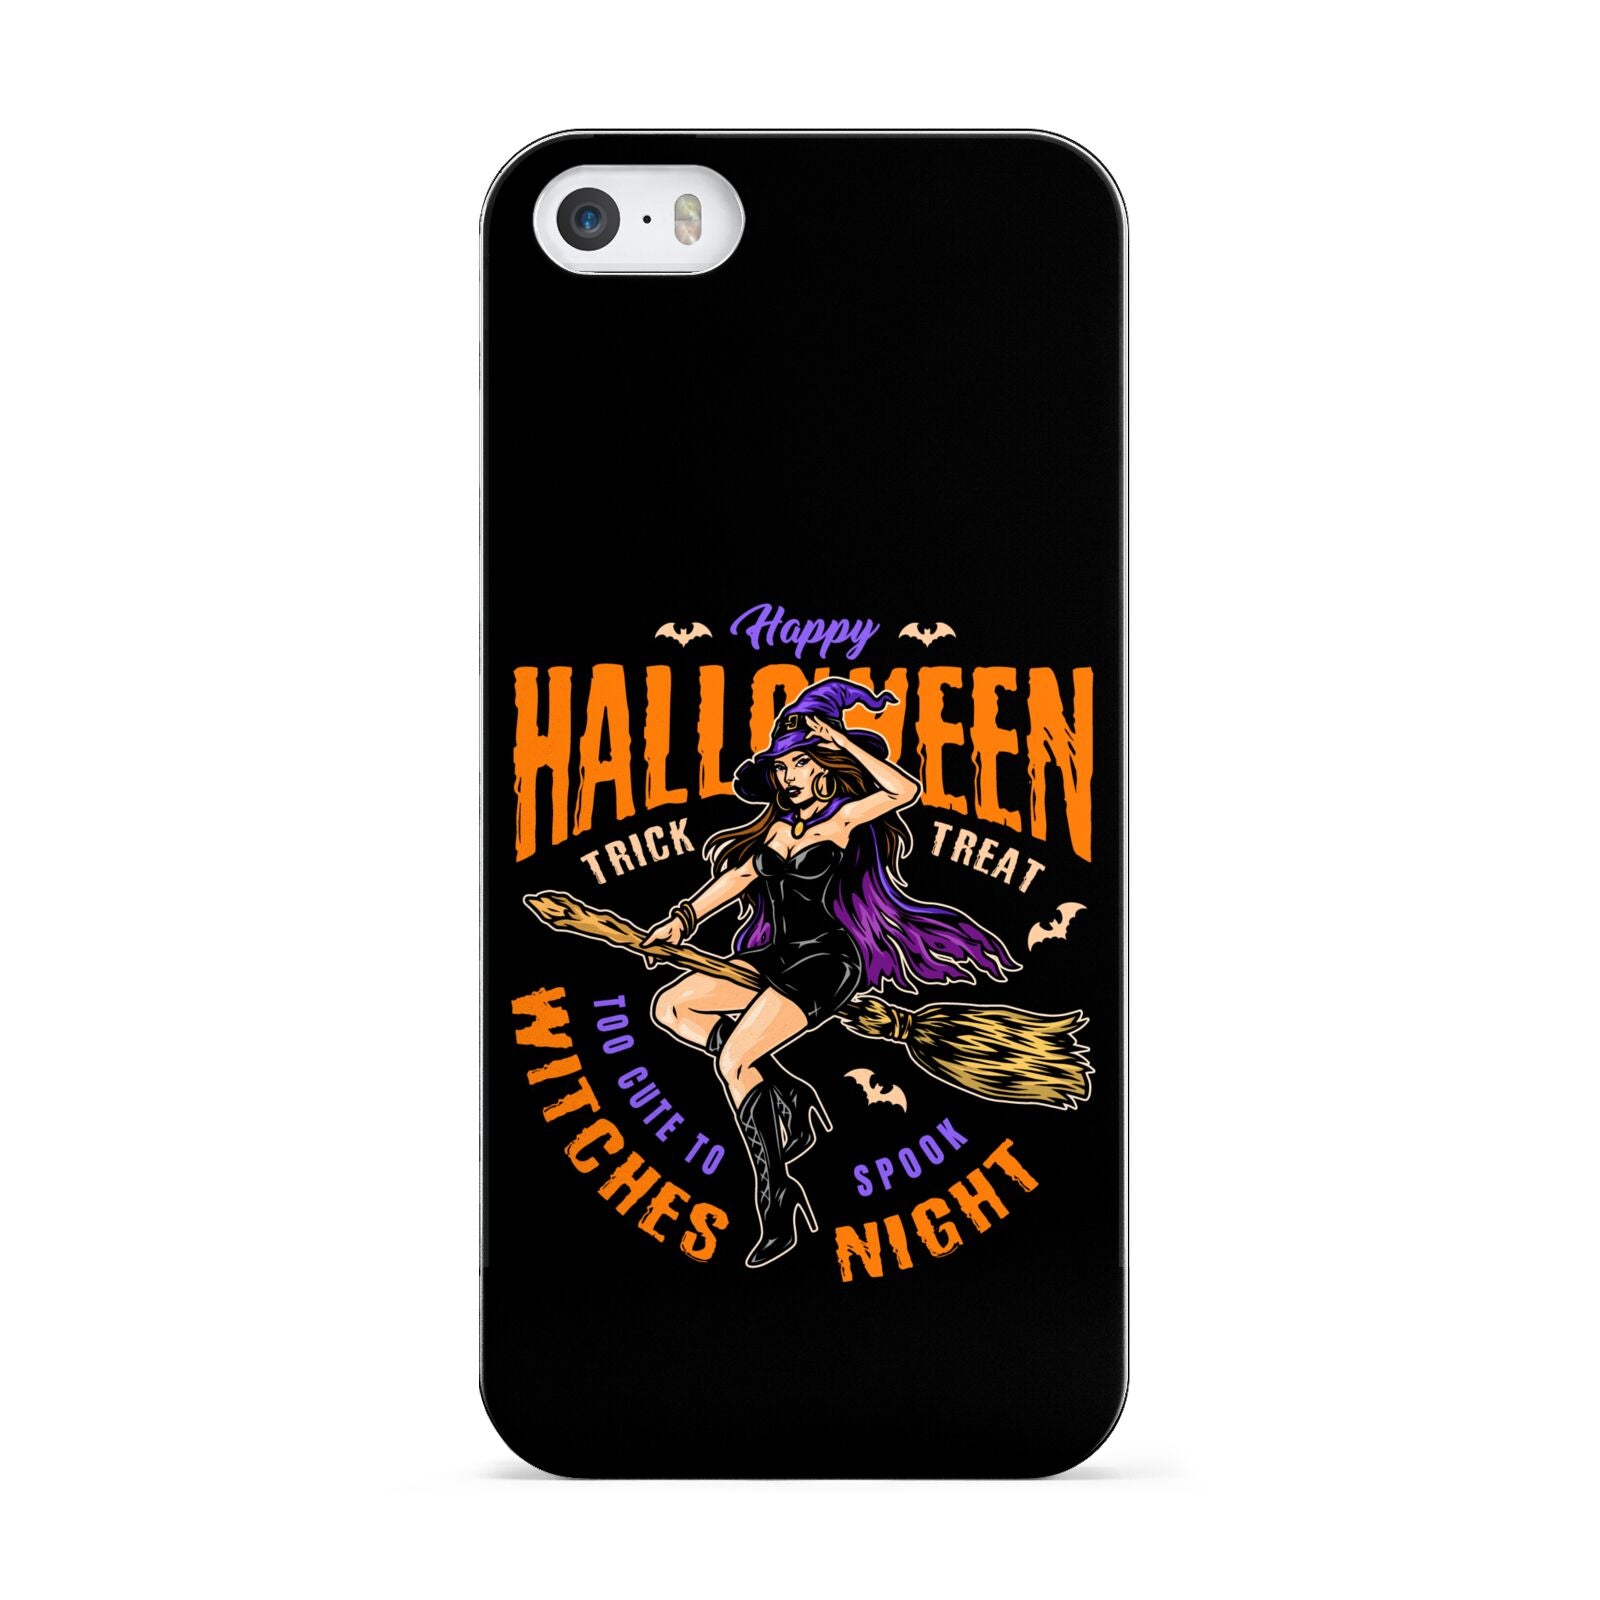 Witches Night Apple iPhone 5 Case